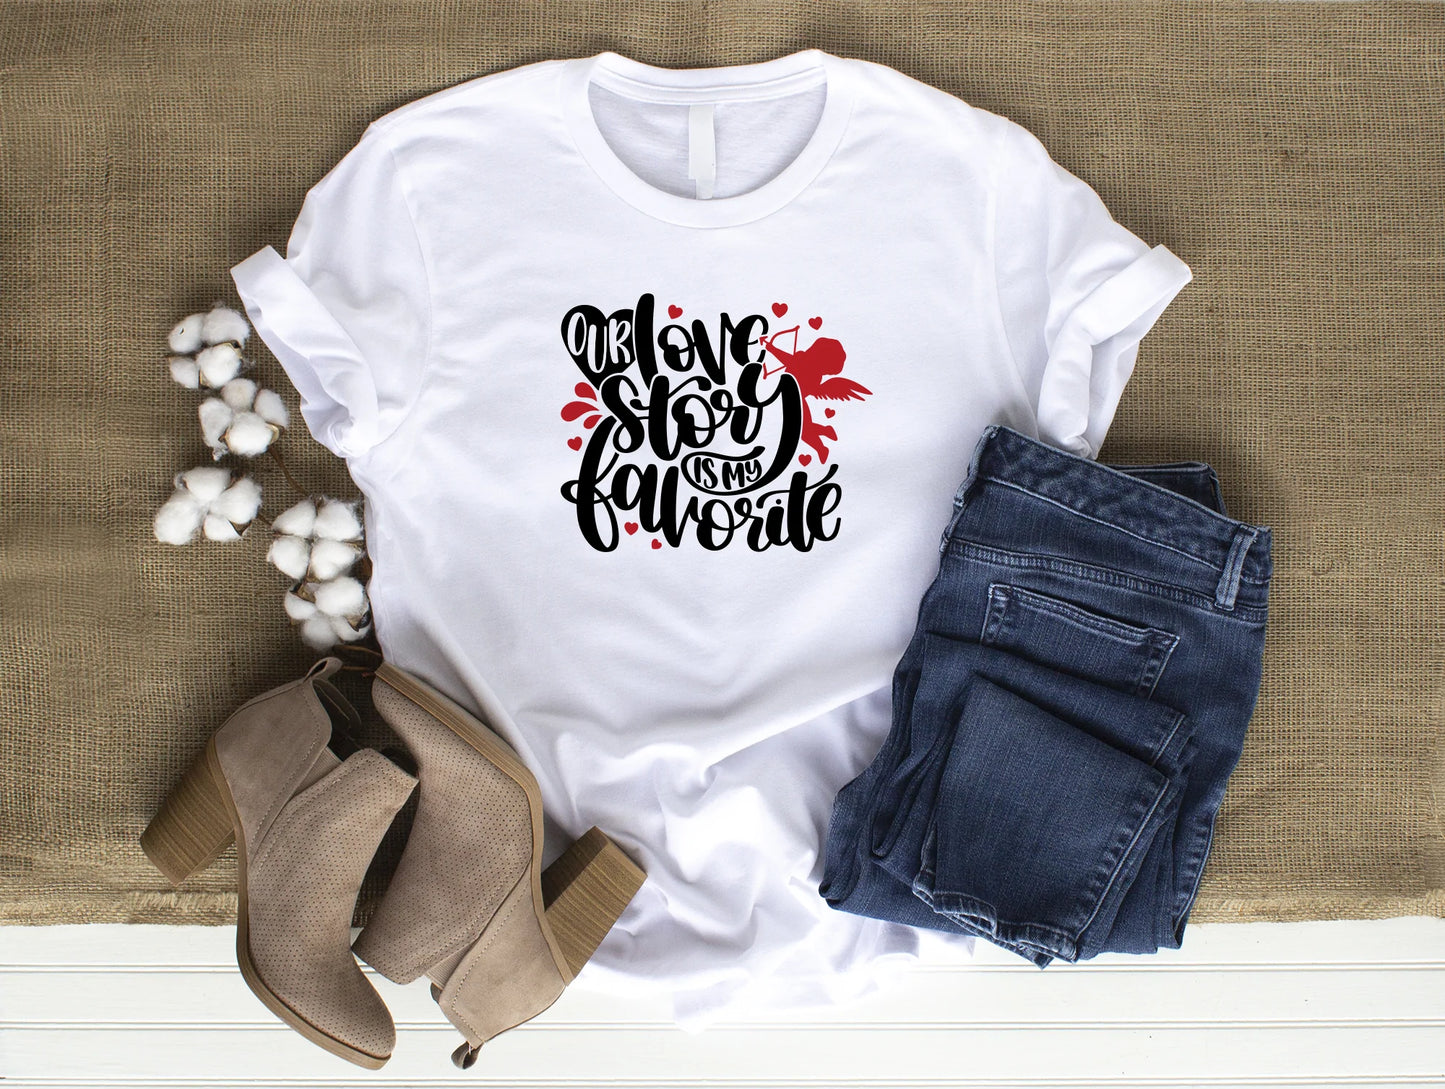 Our Love Story Is My Favorite Cute Comfy Valentine's Day White T-Shirt Medium